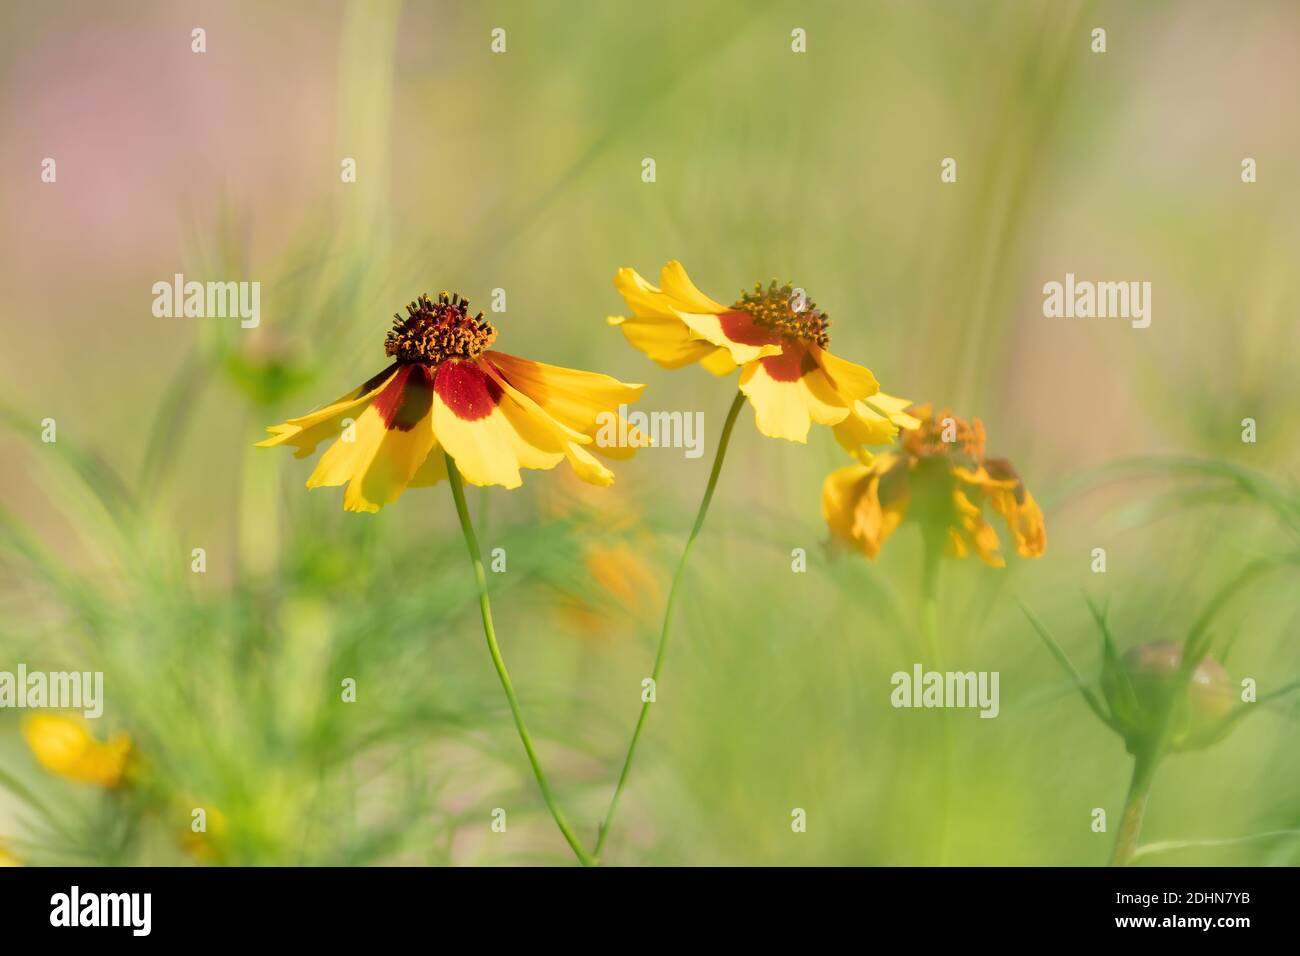 Yellow blooming flowers with brown hearts in a field. Sunflower, 'Goldrausch' Helenium autumnale. Selective focus. Stock Photo